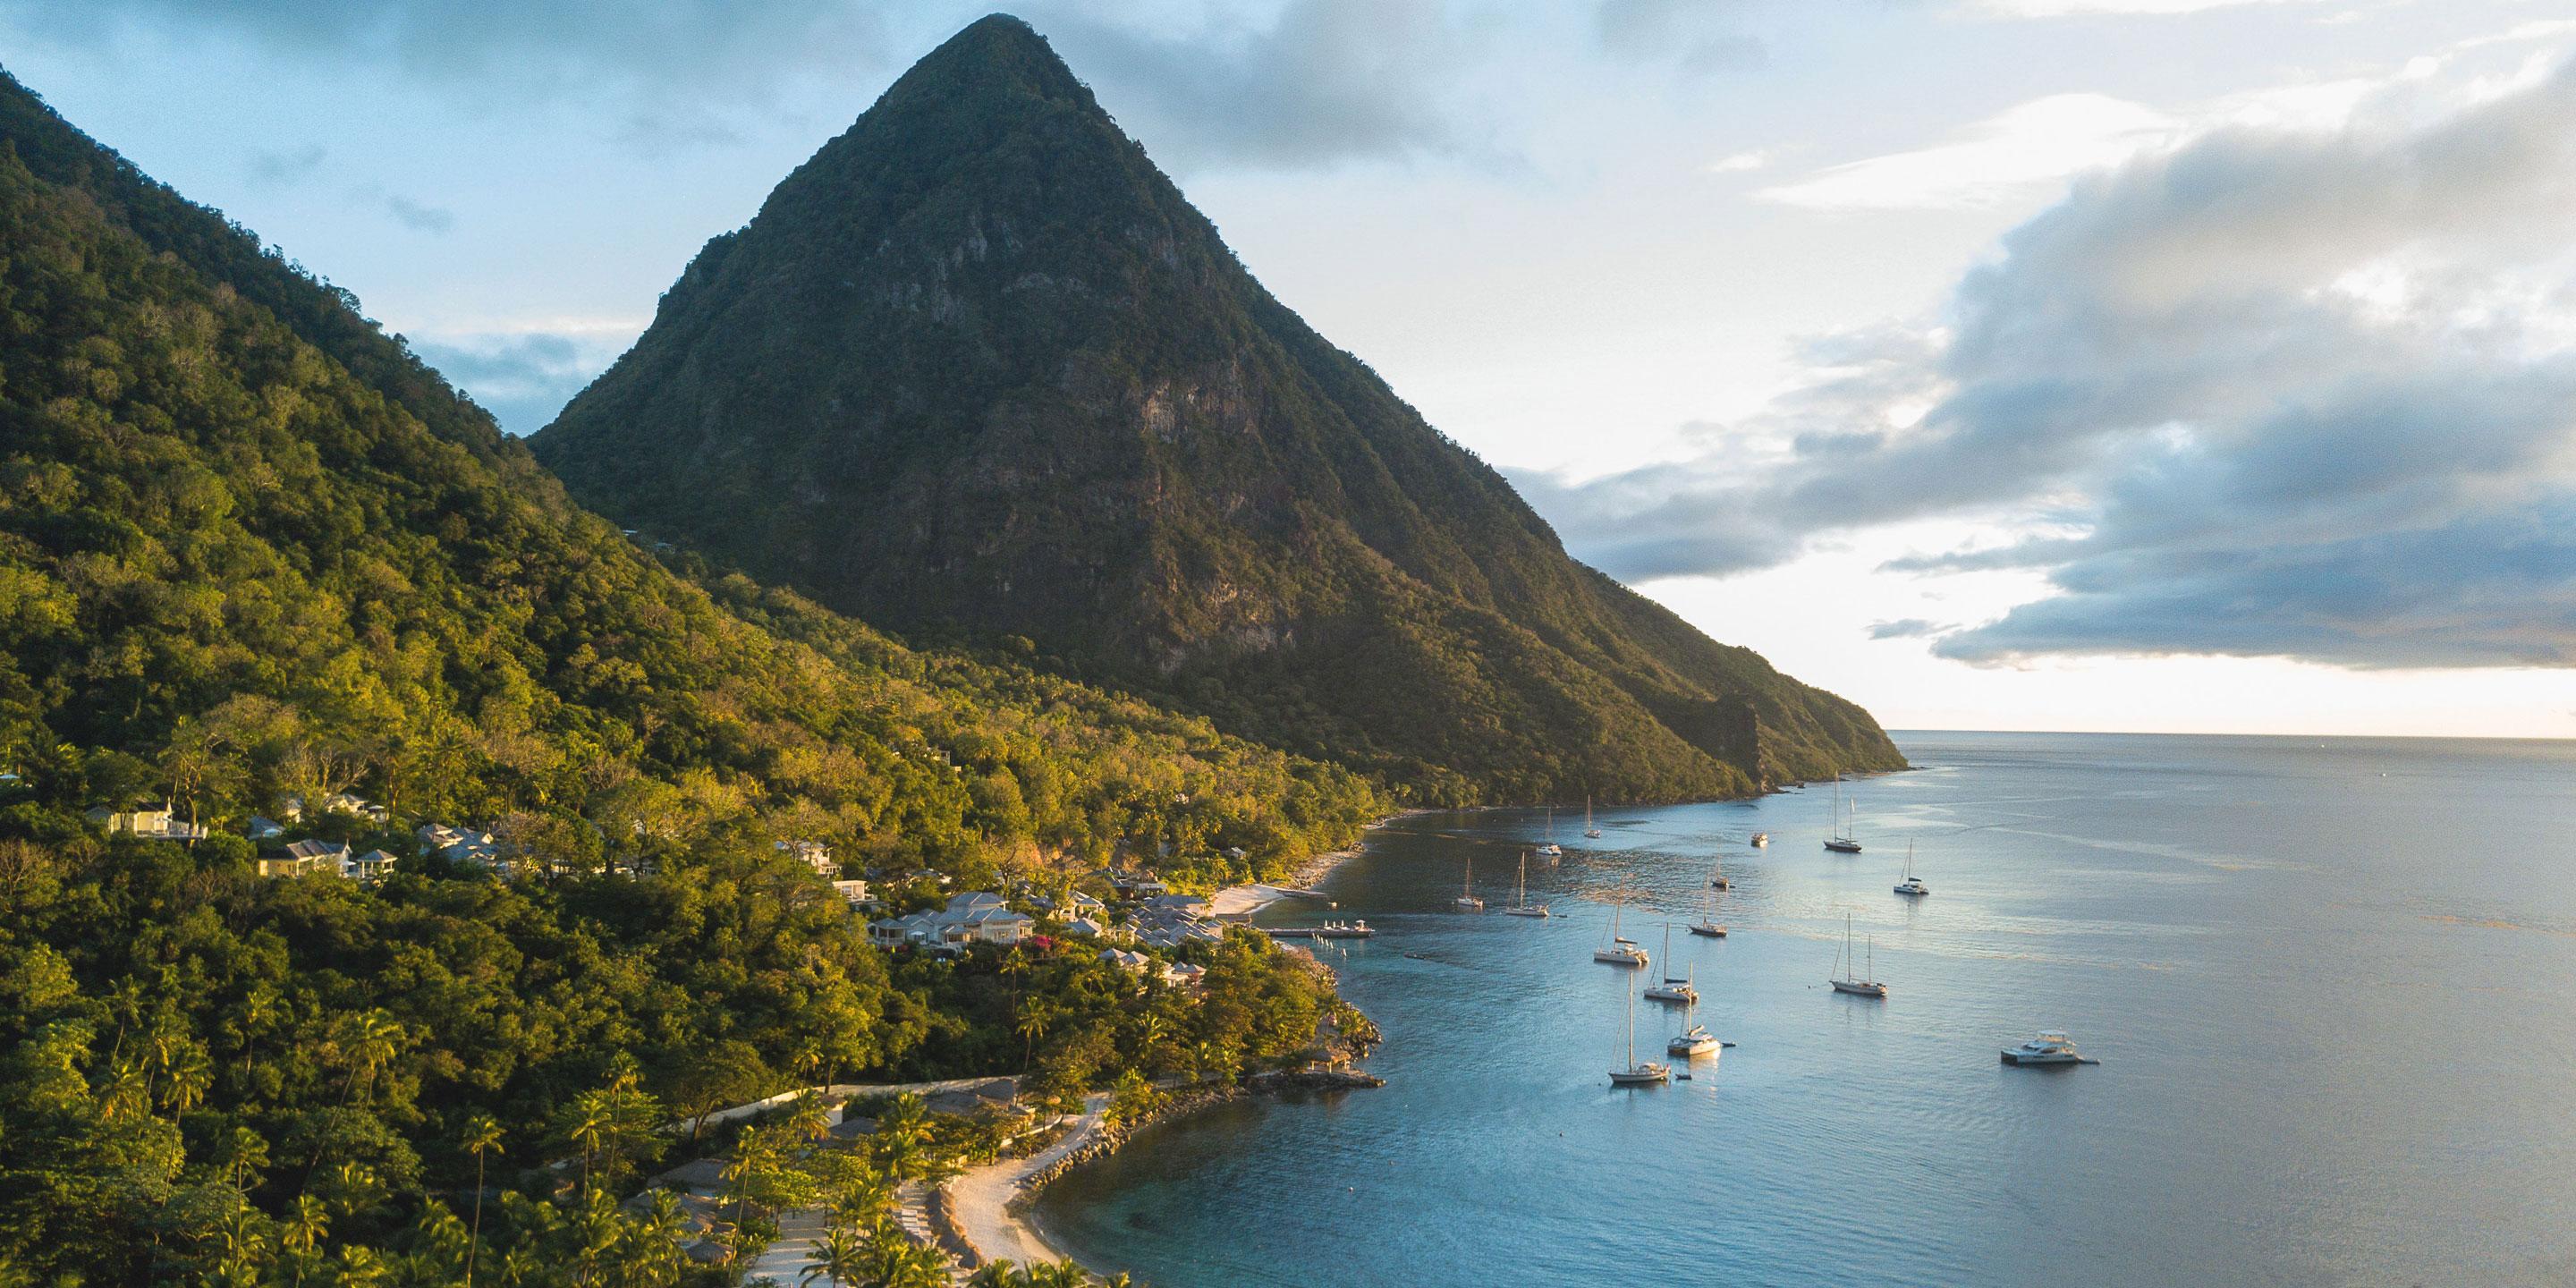 Sailboats anchored near the Pitons in St. Lucia